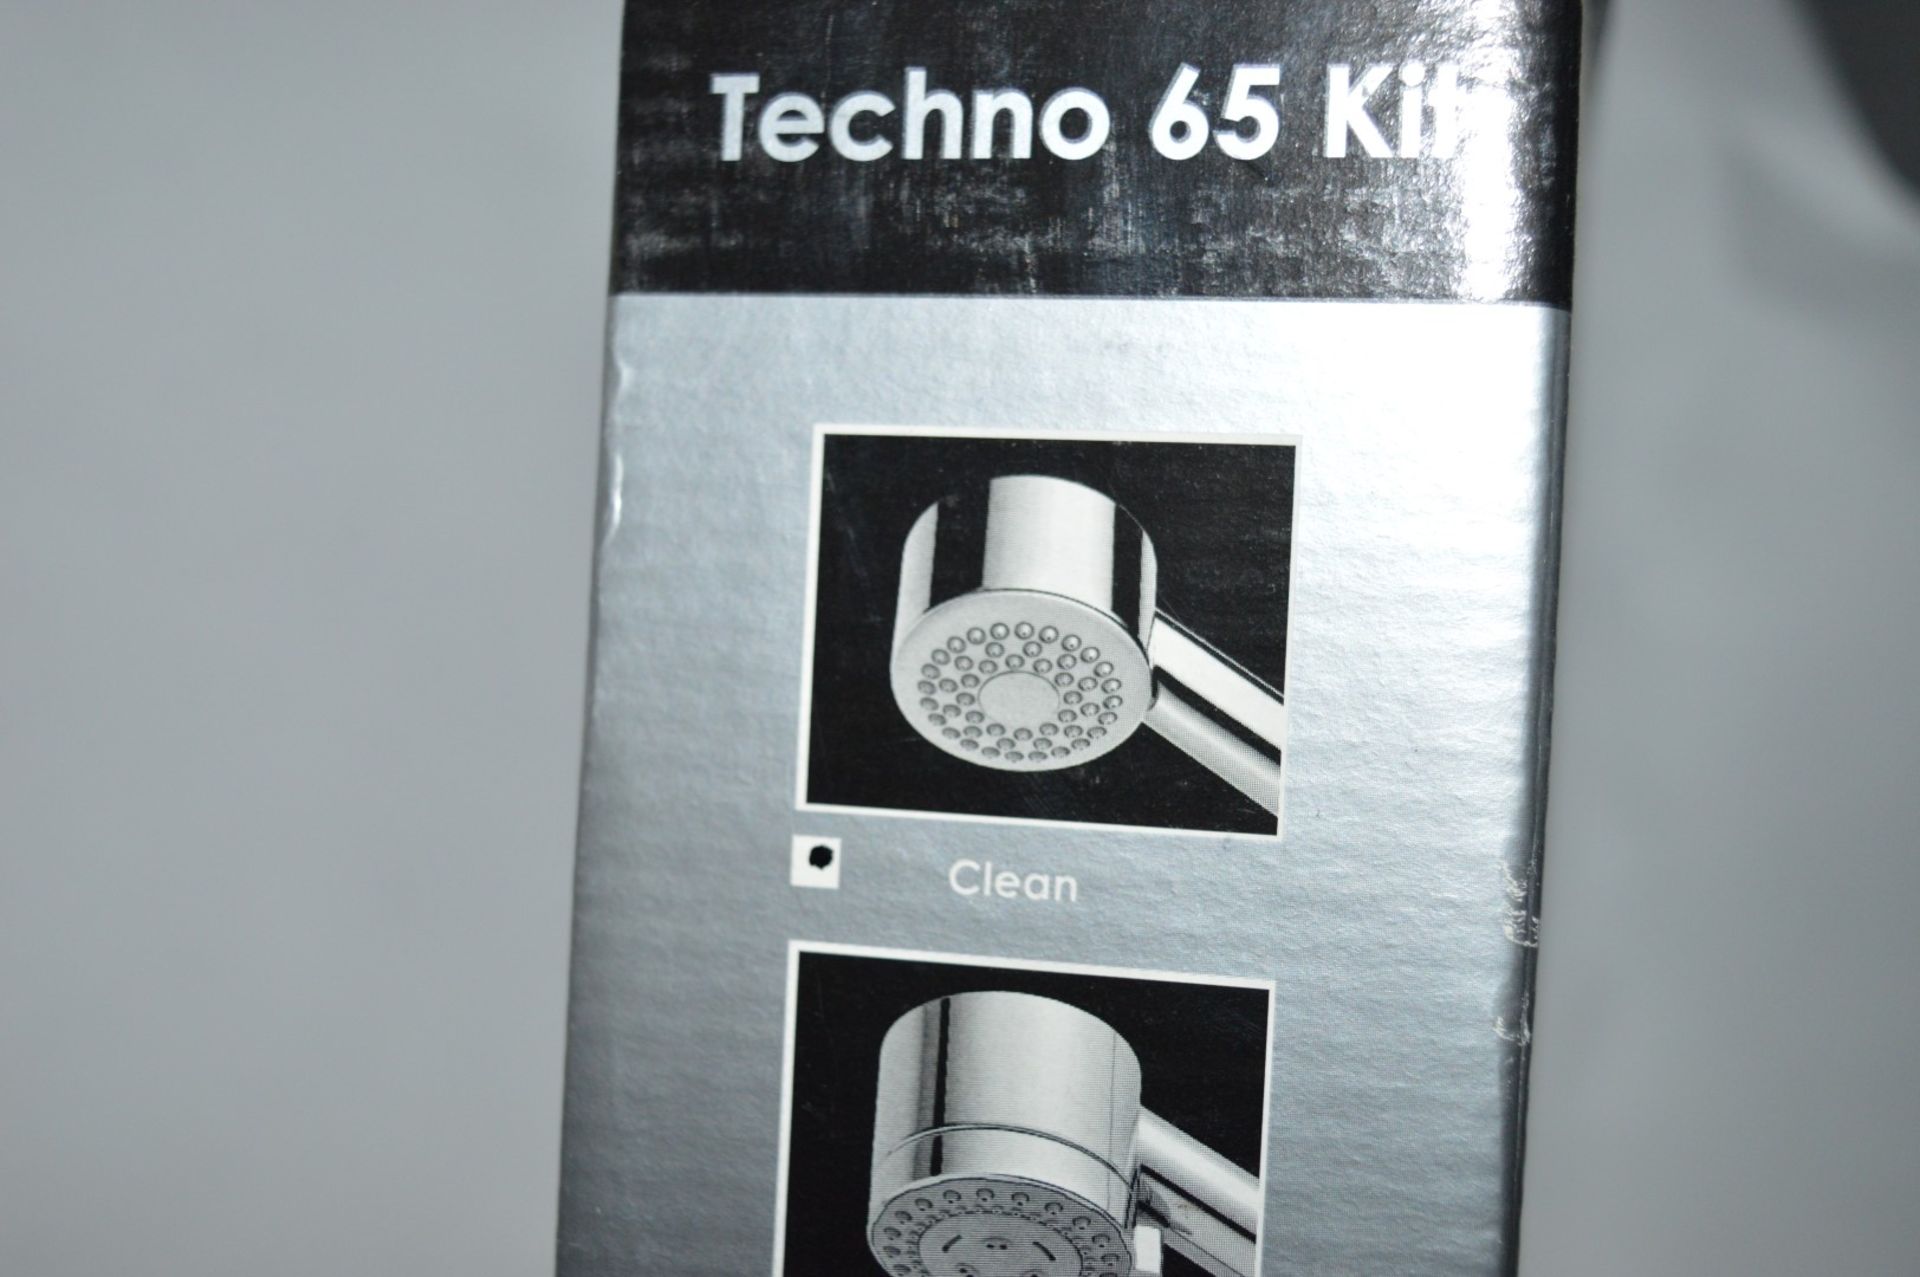 1 x Bath Store Techno 65 Shower Kit - Modern Chrome Finish - Unused Boxed Stock - CL011 - Includes - Image 2 of 4